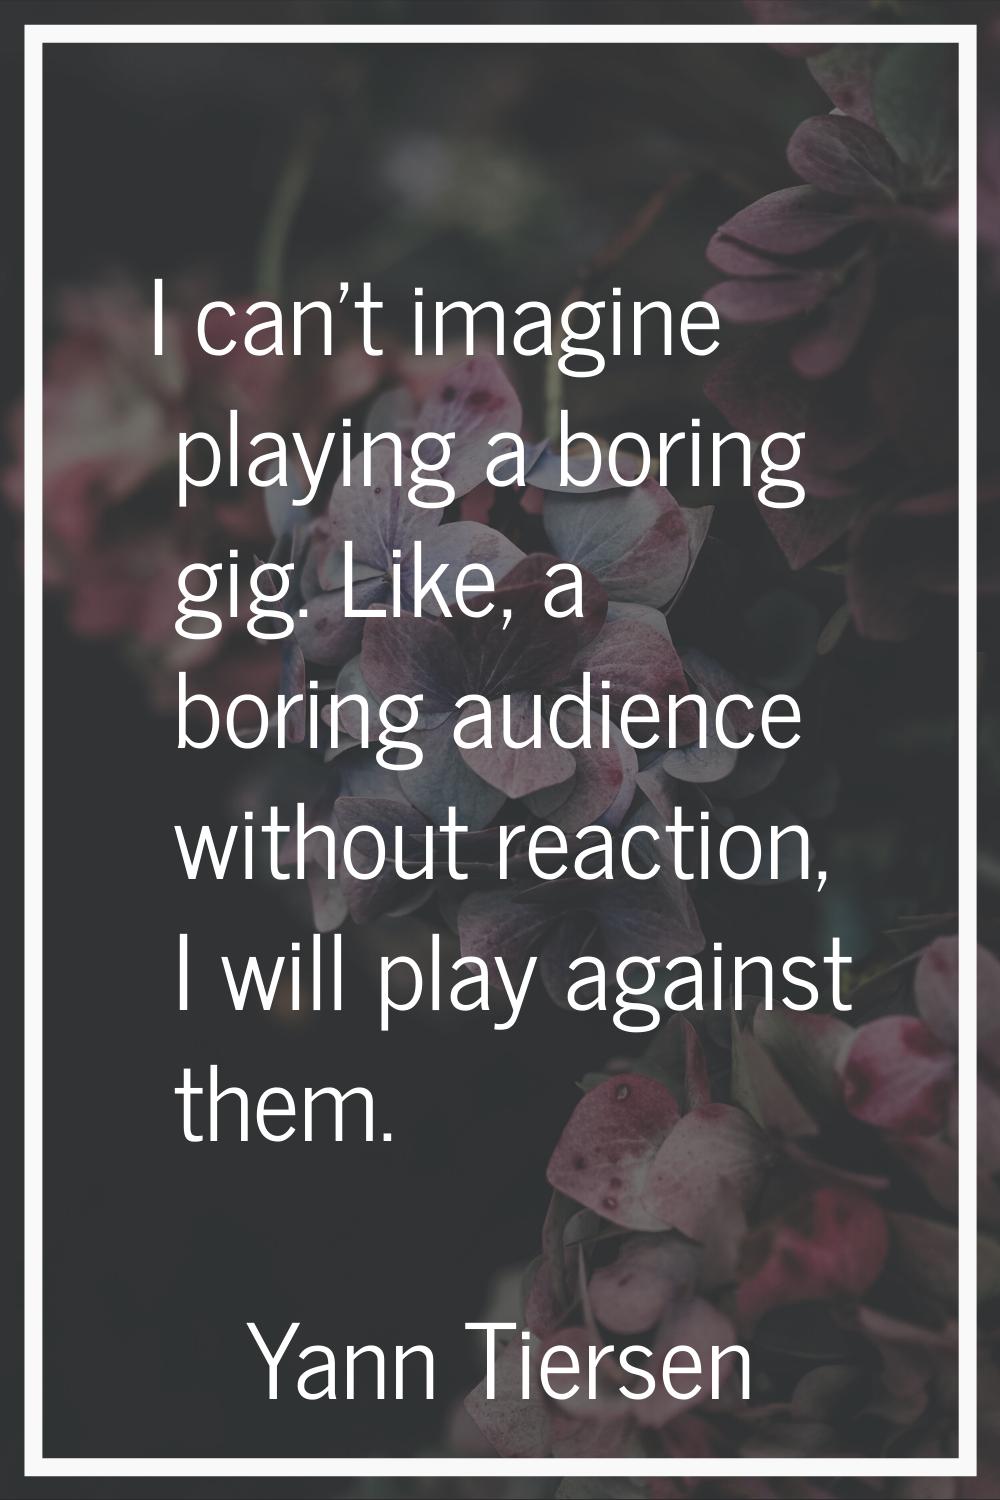 I can't imagine playing a boring gig. Like, a boring audience without reaction, I will play against